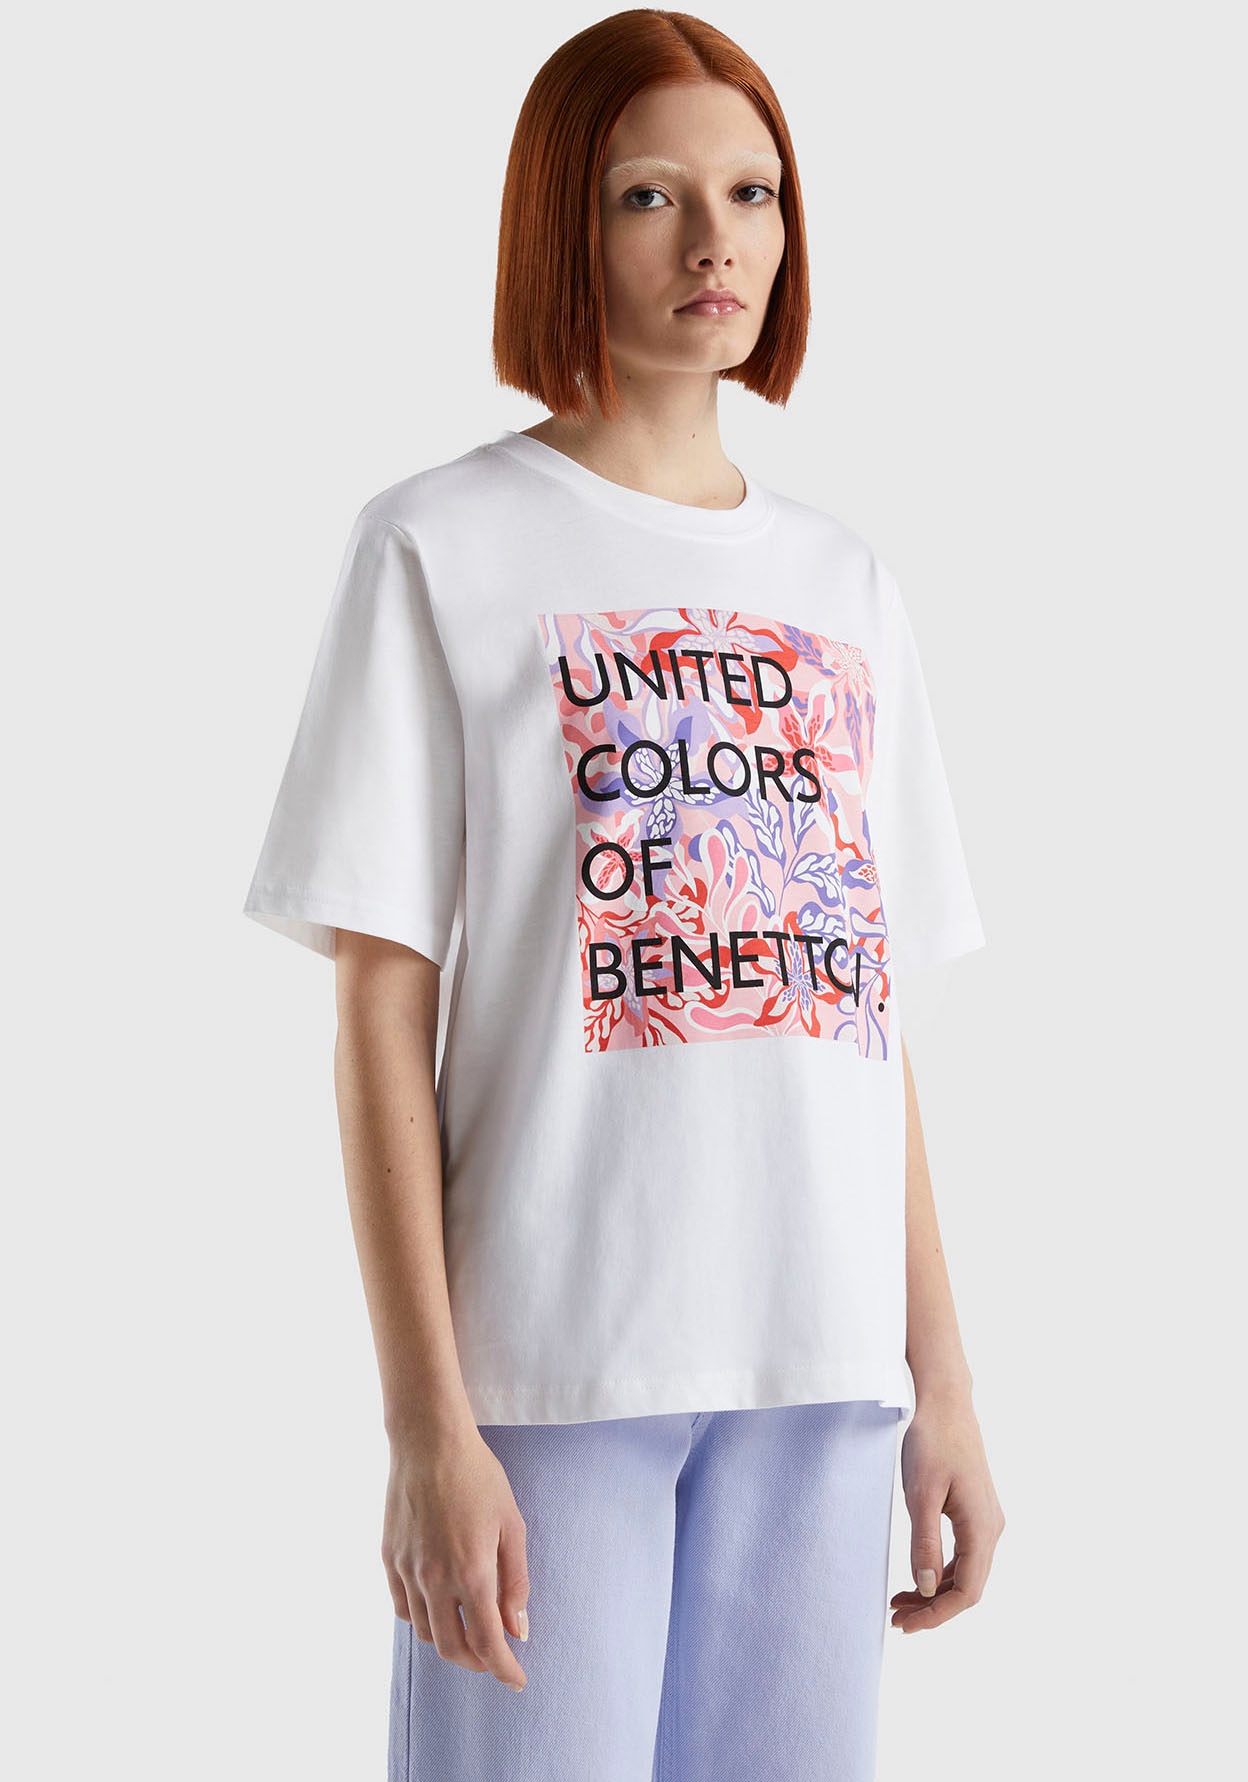 United Colors of bei T-Shirt ♕ Benetton